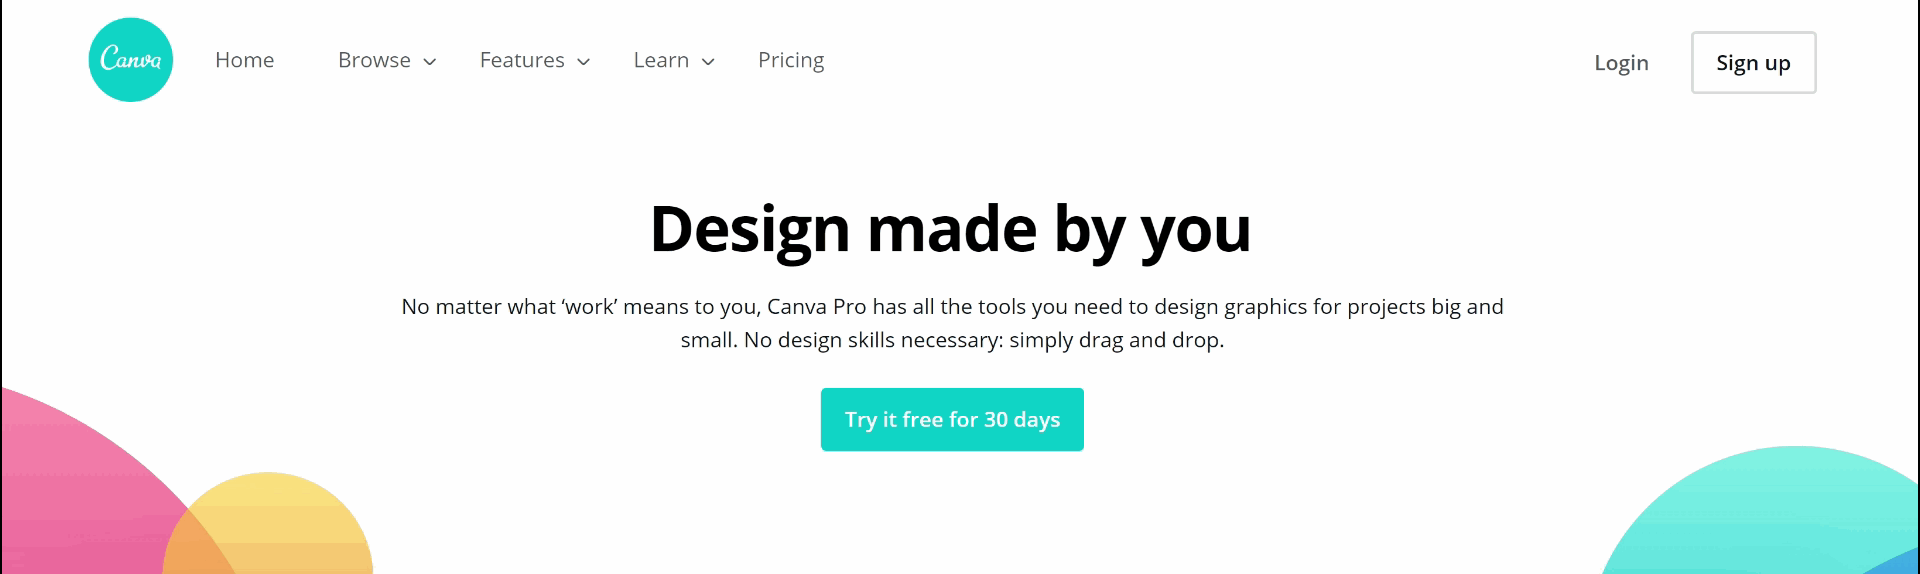 Canva Review 2020, how to get 30 days free trial to Canva Pro